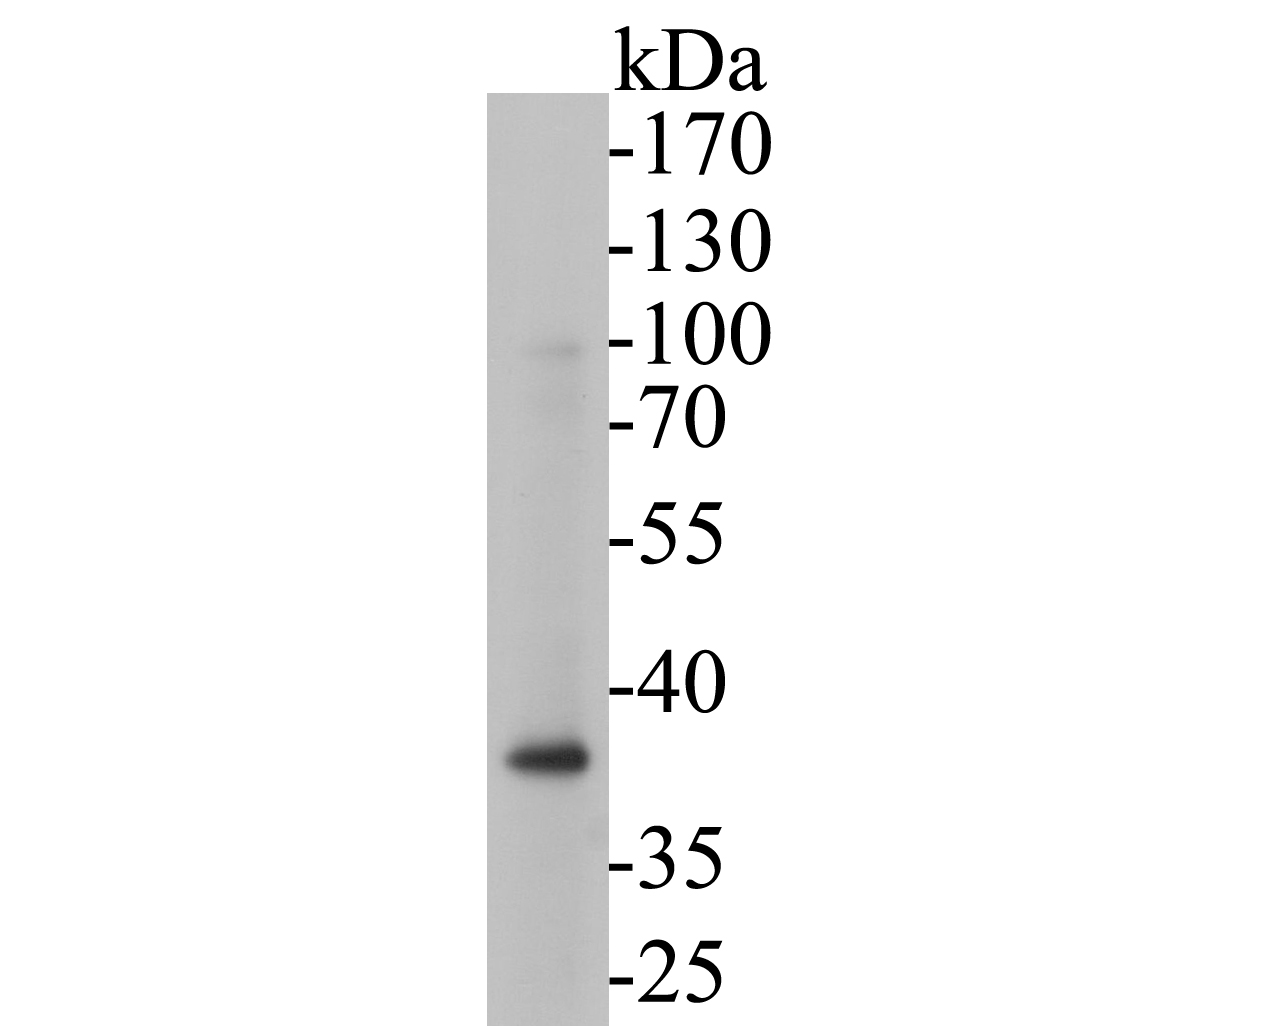 Western blot analysis of Tropomodulin 2 on rat brain tissue lysates. Proteins were transferred to a PVDF membrane and blocked with 5% BSA in PBS for 1 hour at room temperature. The primary antibody (ET7110-27, 1/500) was used in 5% BSA at room temperature for 2 hours. Goat Anti-Rabbit IgG - HRP Secondary Antibody (HA1001) at 1:5,000 dilution was used for 1 hour at room temperature.